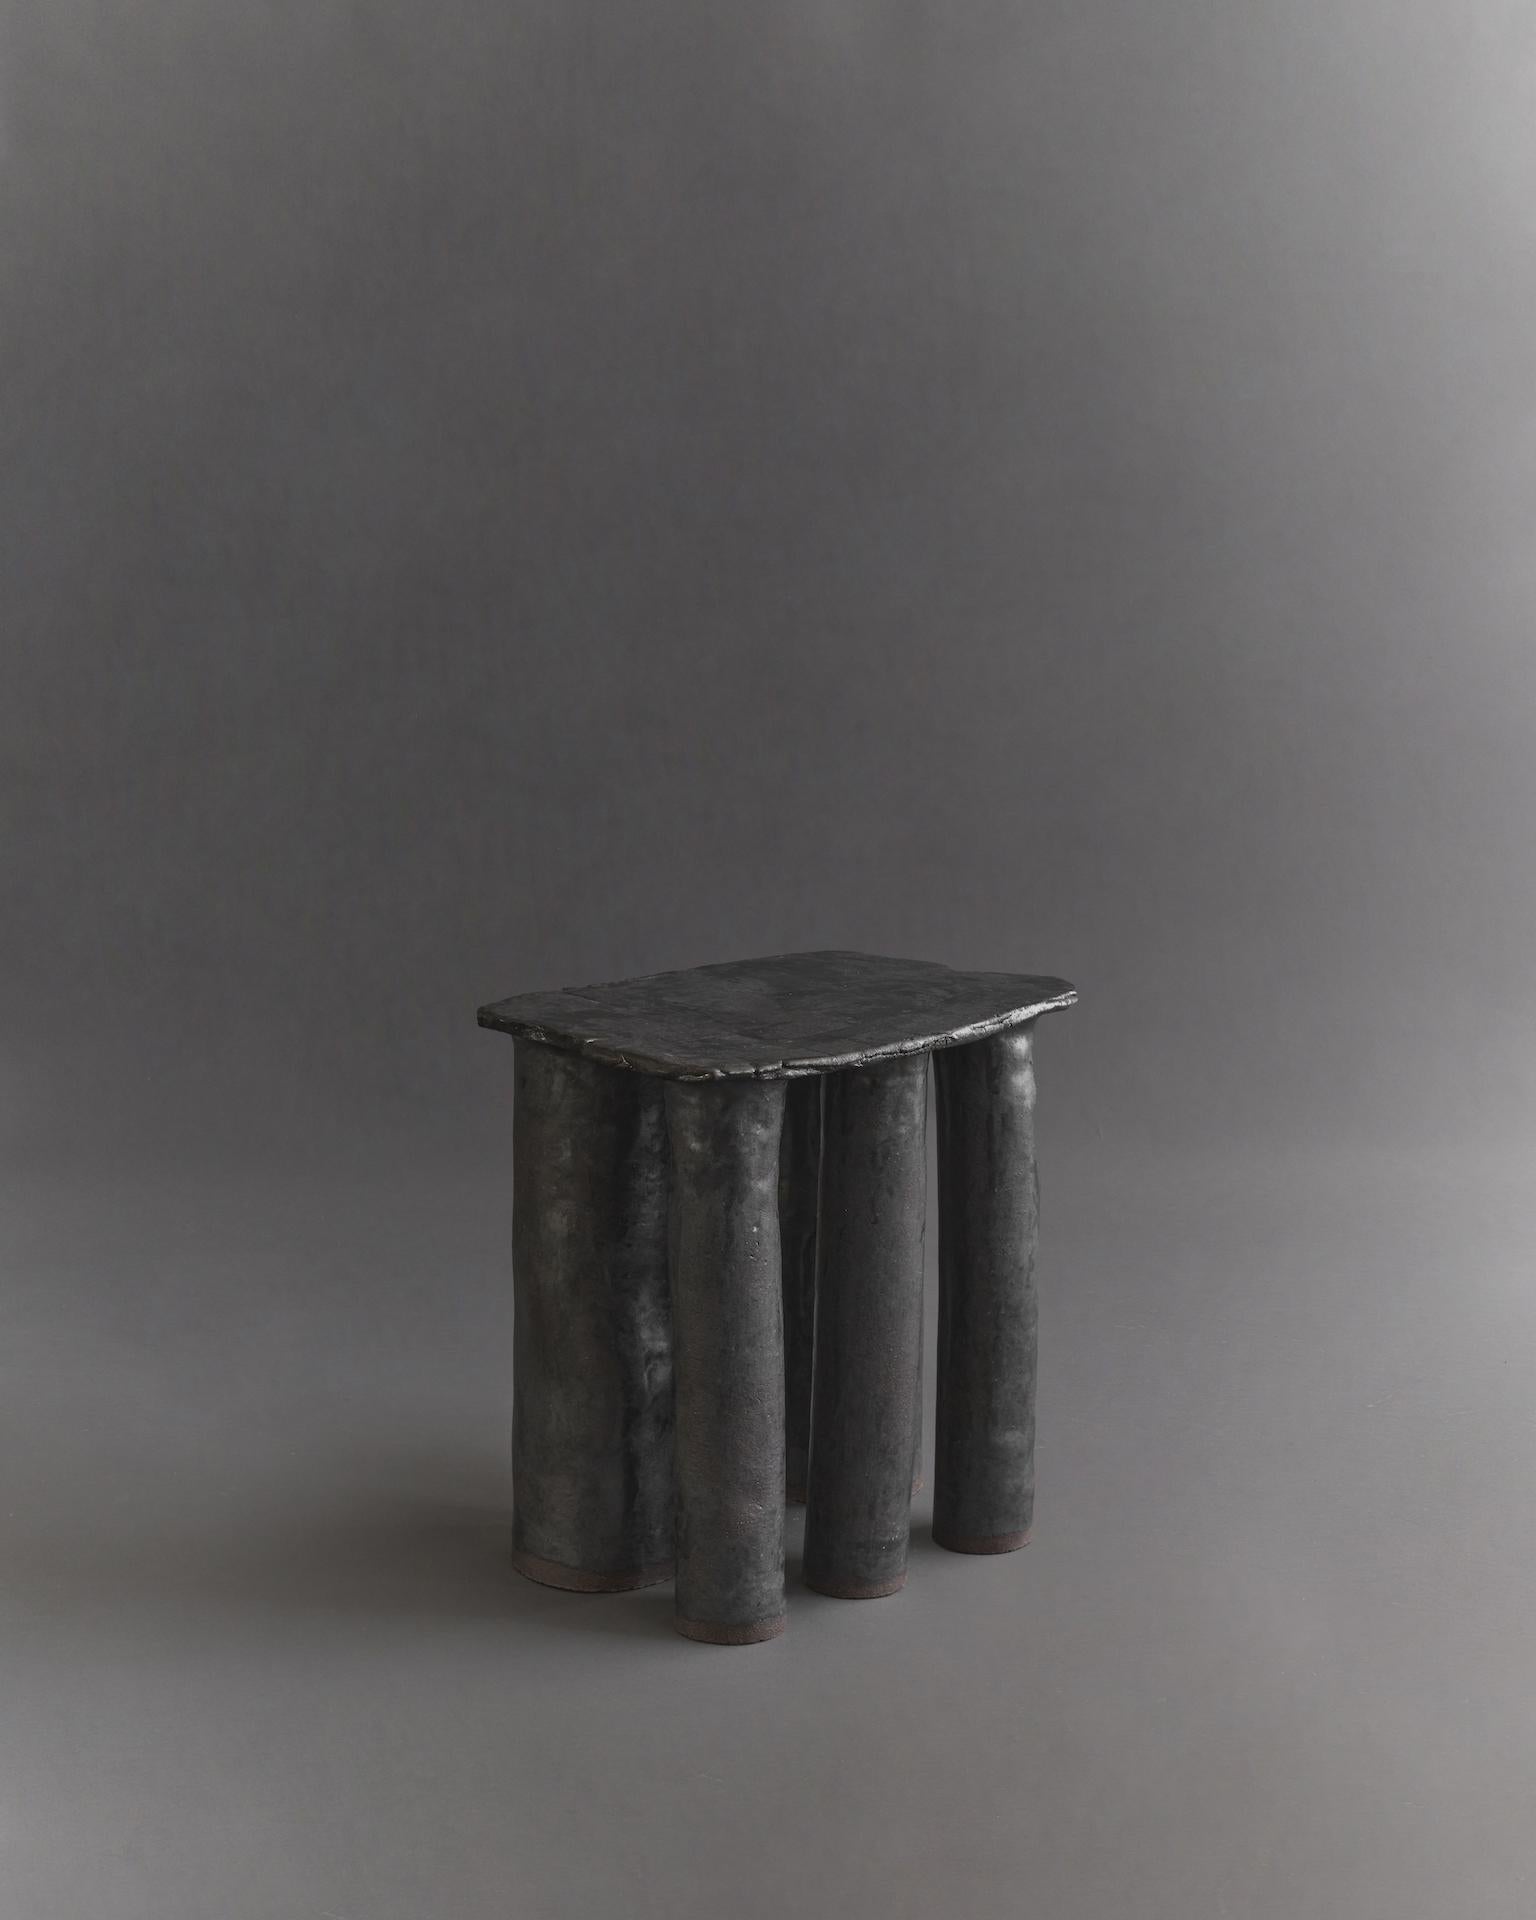 Cleo clay side table by Ombia
Dimensions: W 42 x D 33 x H 43.5 cm
Materials: Clay, textured black glaze. 
Custom colors upon request.


Ombia is a ceramic sculpture and design studio based in Los Angeles. The name and its roots originates from